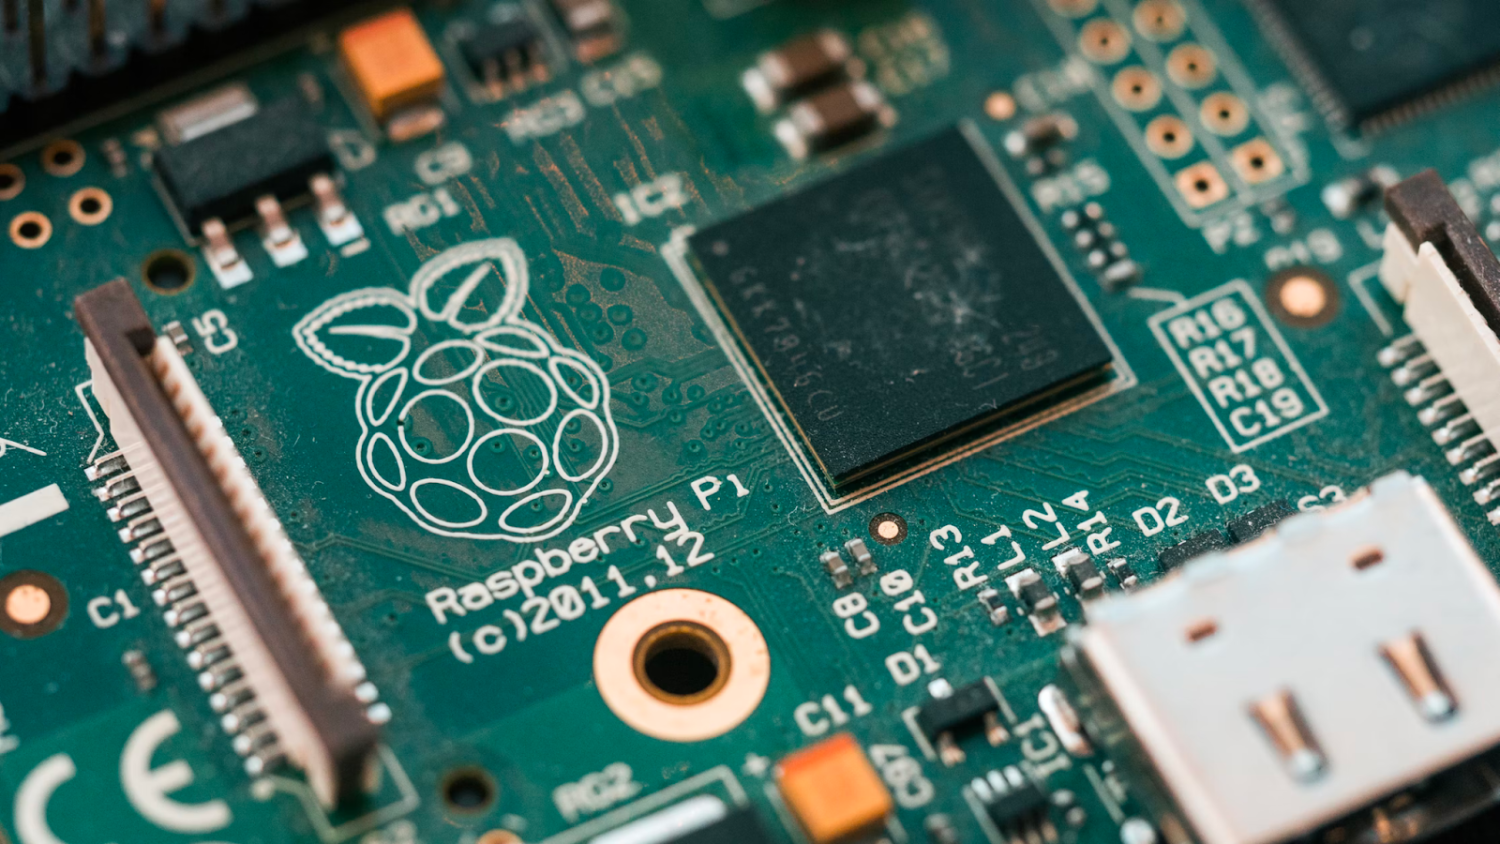 Raspberry Pi vs. Arduino: Which is better? Performance 